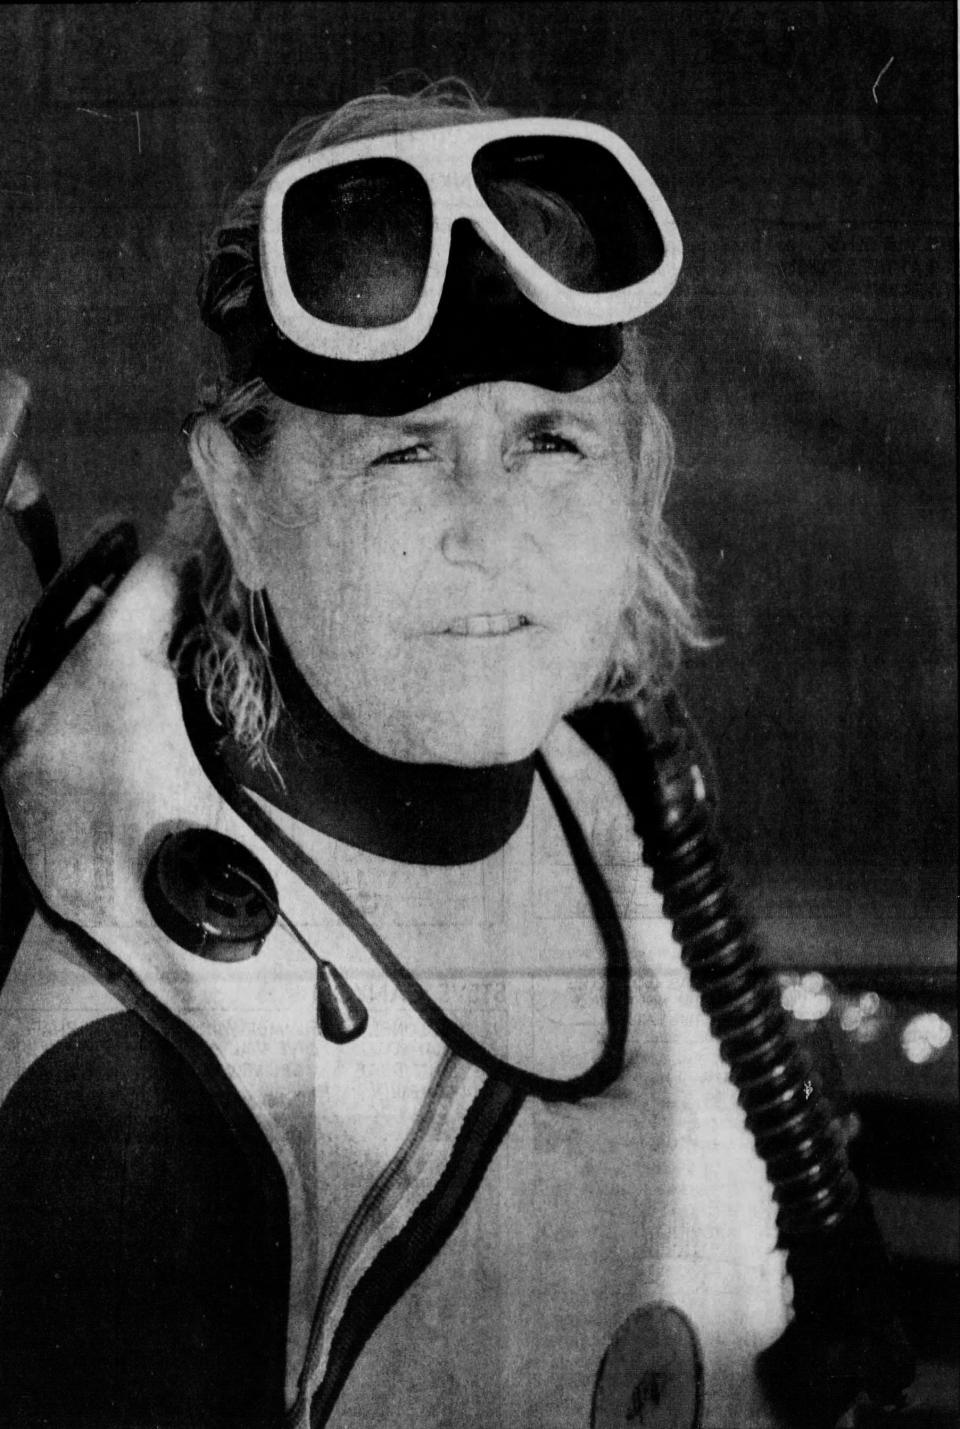 The late scuba-diving pioneer Norine Rouse spent much of her decades-long career here championing sea turtles as she taught Palm Beachers — among them, members of the Kennedy clan — how to explore the reef areas off Palm Beach County. A new book chronicles insights from her hundreds of dives.